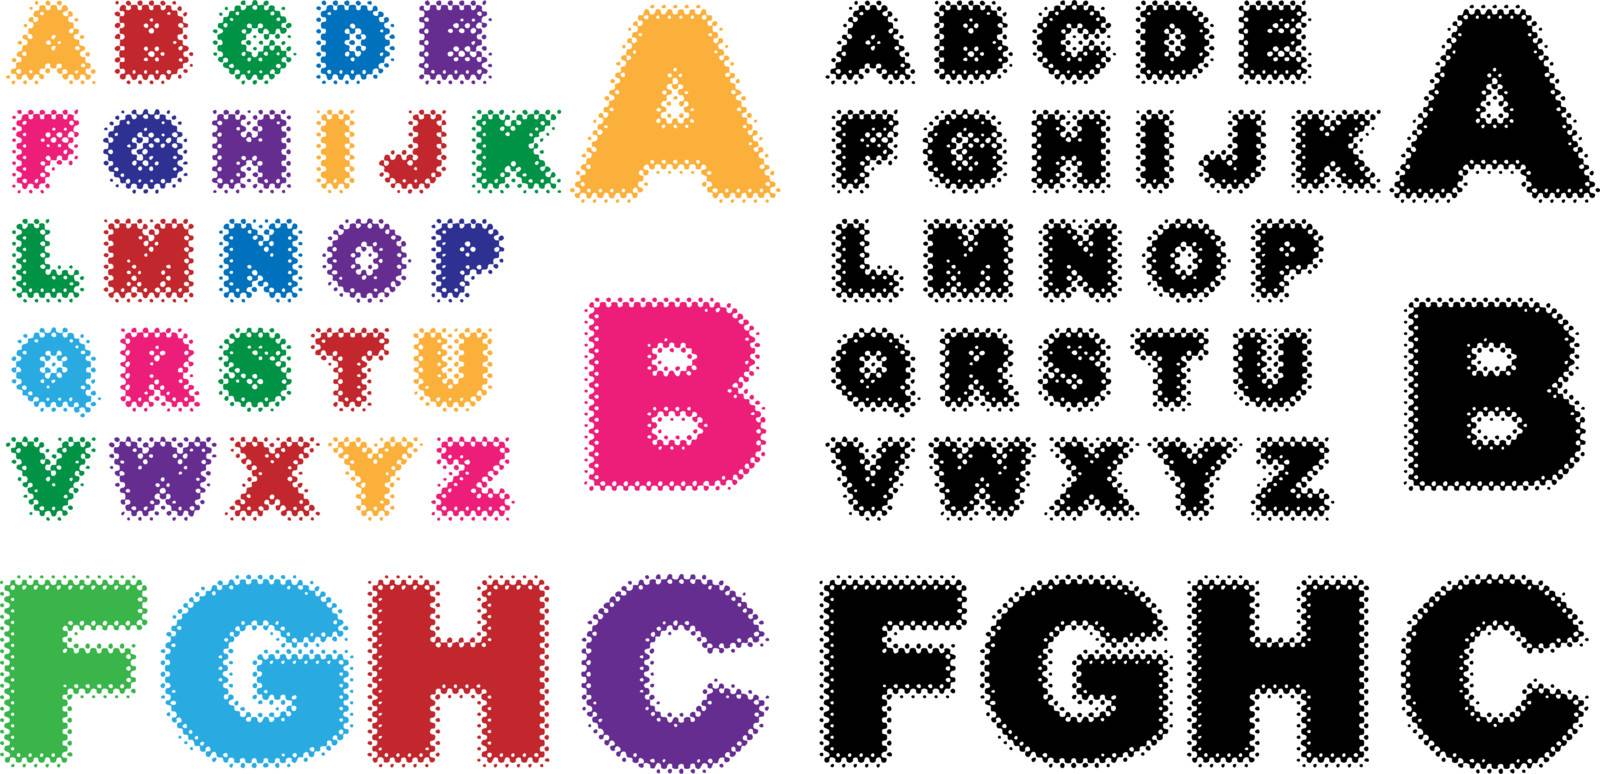 Set of letters of the alphabet in half tone - both color and black / white versions.